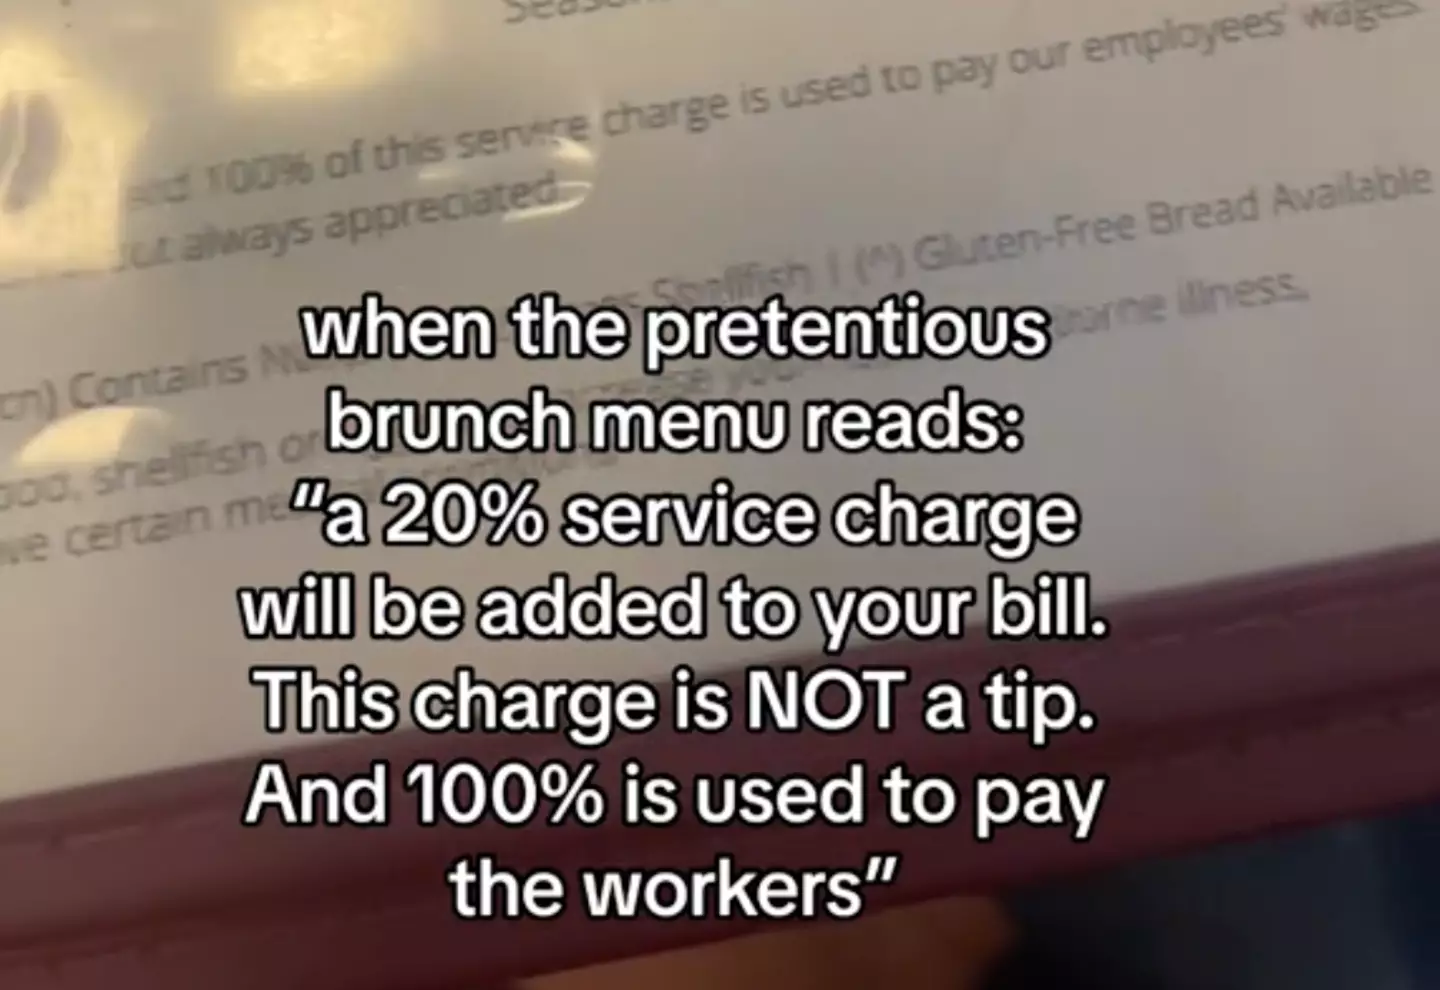 People were confused by the service charge.